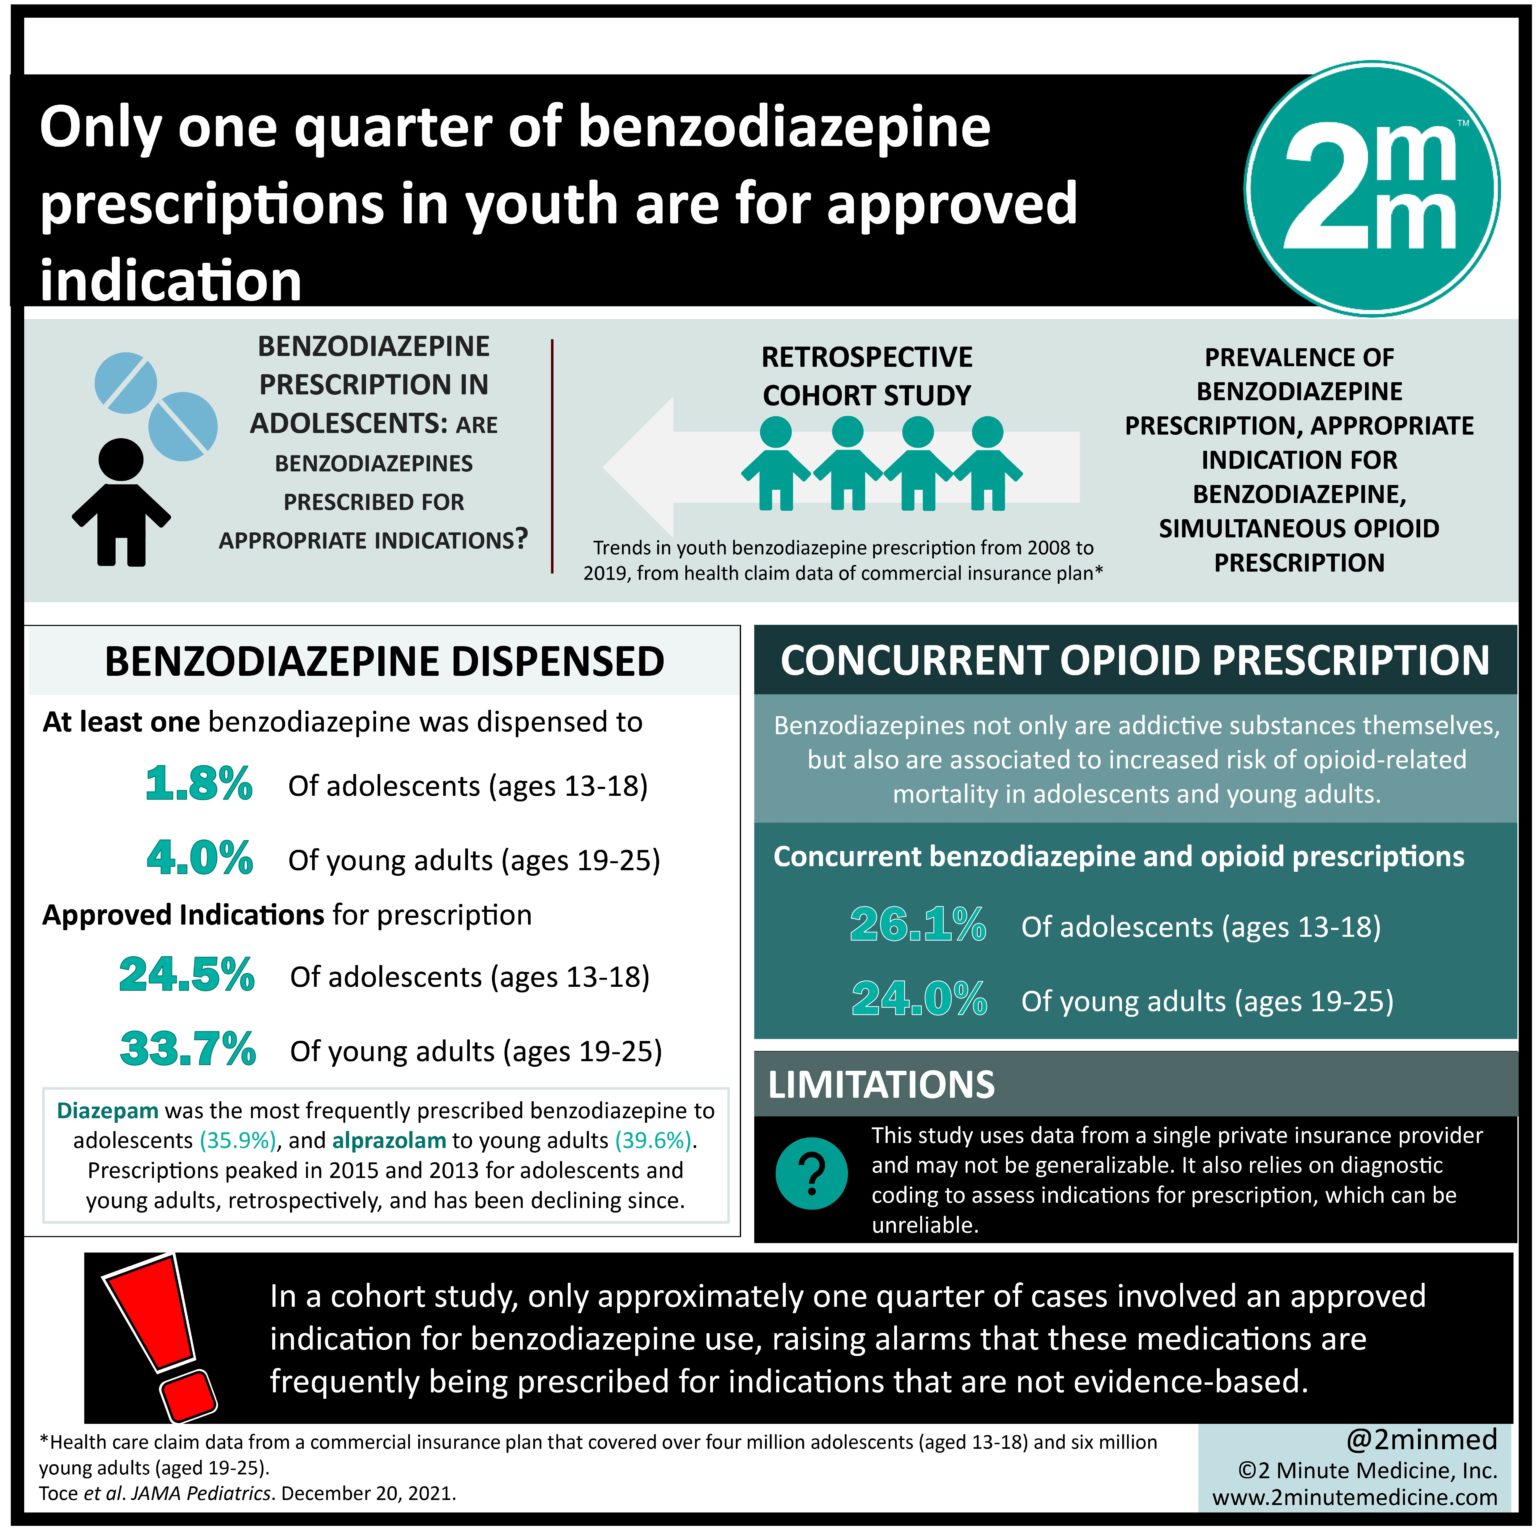 Association Between Chiropractic Spinal Manipulative Therapy and Benzodiazepine Prescription in Patients with Radicular Low Back Pain: A Retrospective Cohort Study Using Real-world Data From the USA